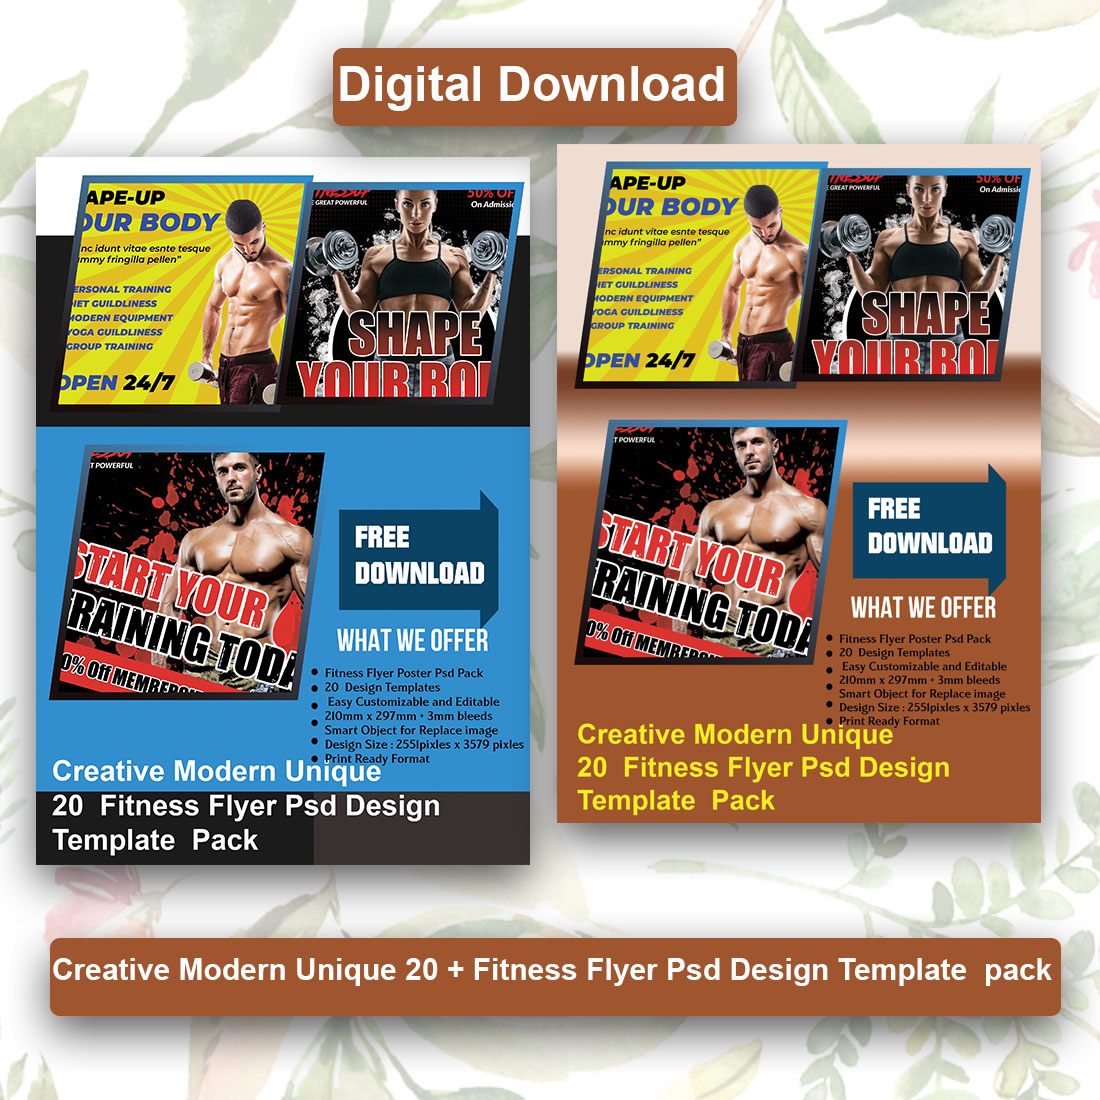 Creative Modern Unique 20 + Fitness Flyer PSD Design Template pack cover image.